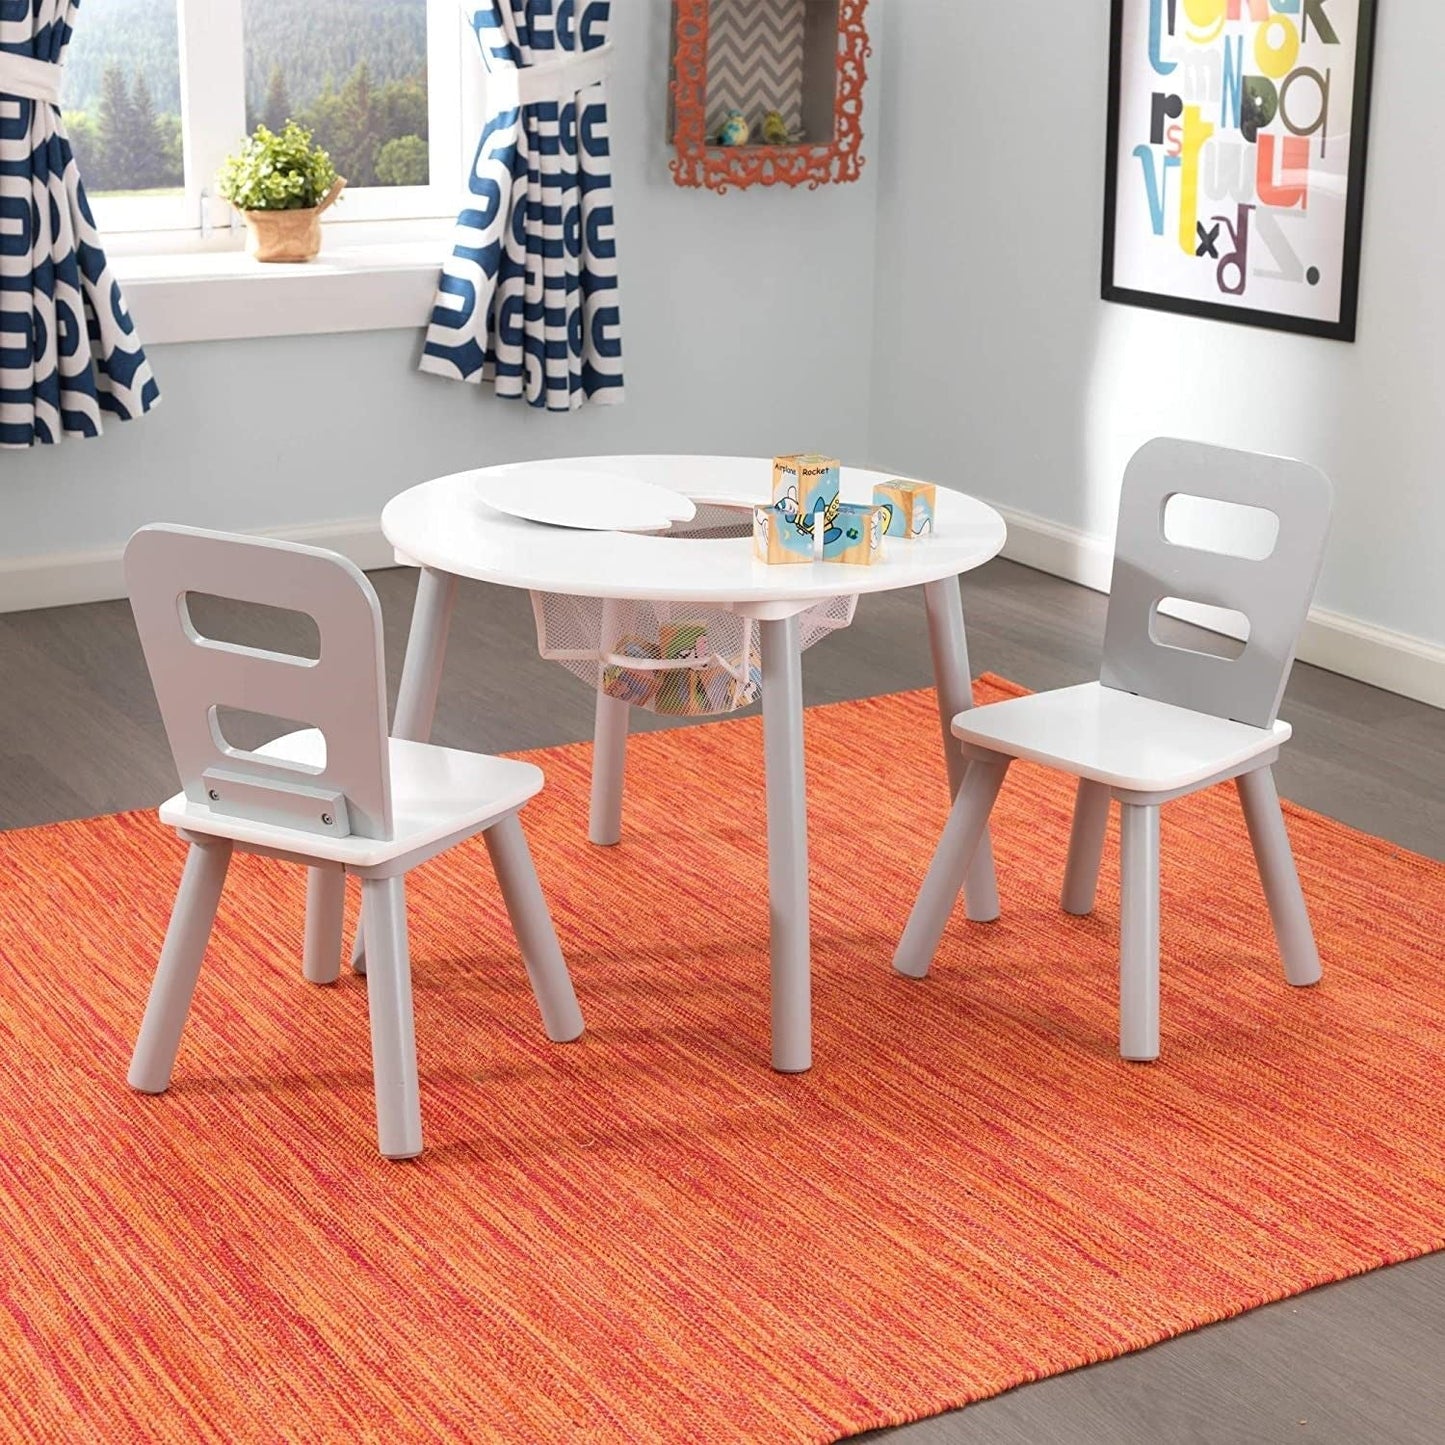 Round Table and 2 Chair Set for kids (Gray) - Little Kids Business